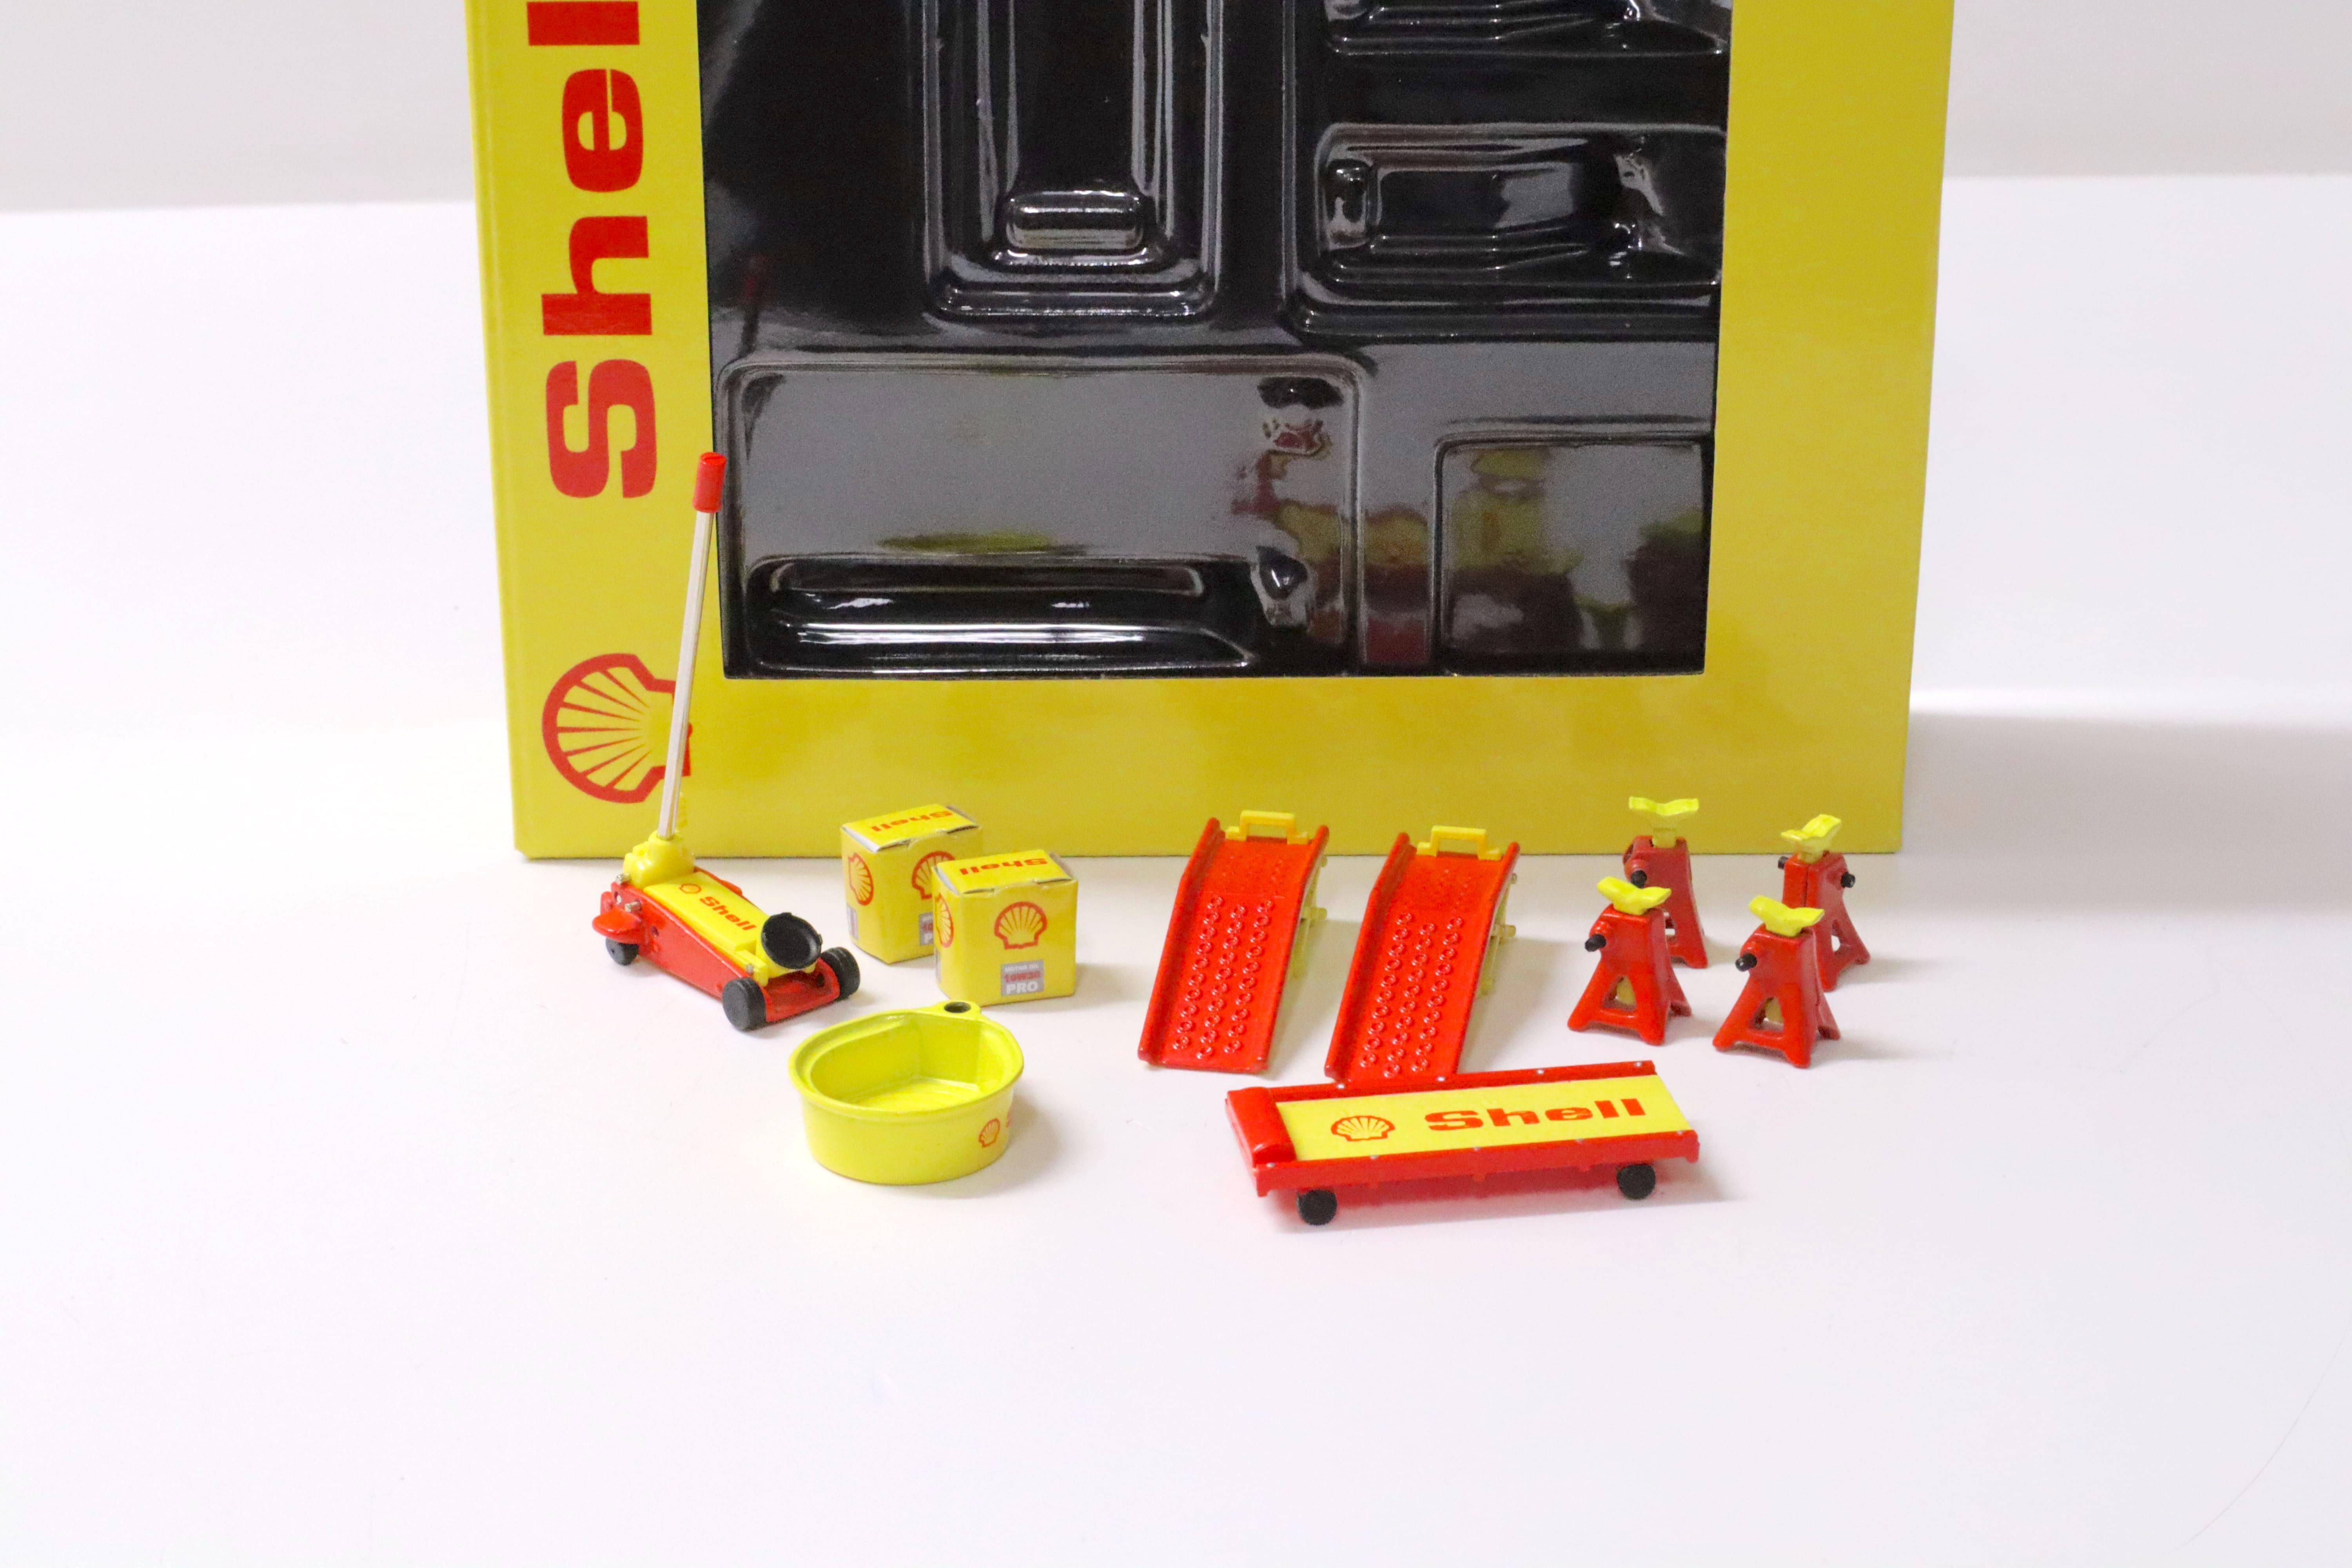 1:18 GMP SHELL SHOP Tool Set #2 Diorama Zubehör yellow/ red